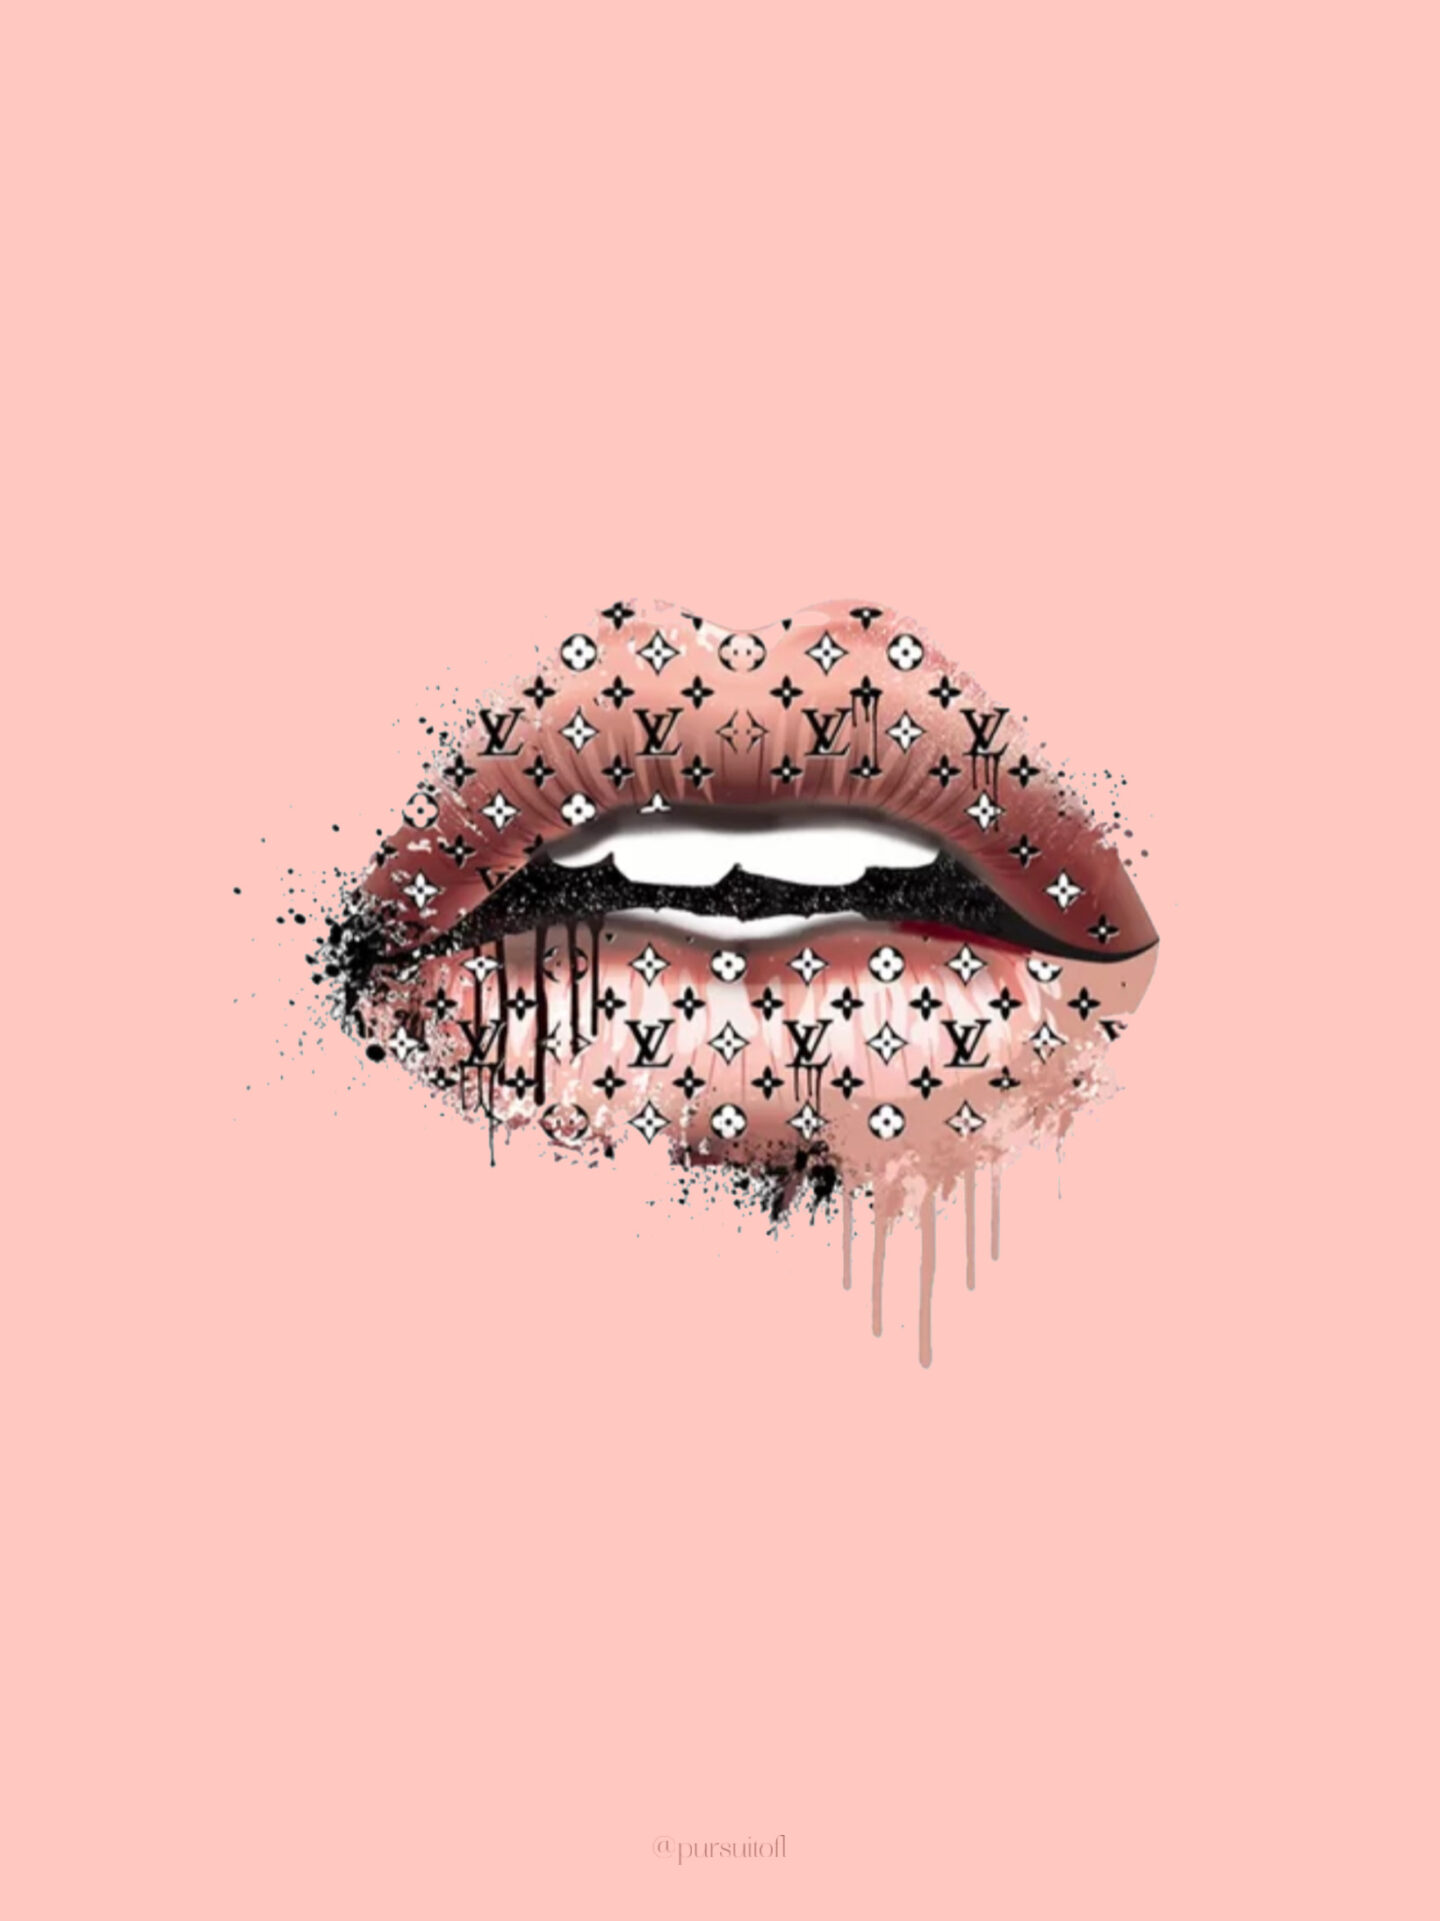 Peach Tablet Wallpaper with Lips covered in Louis Vuitton Branding Dripping